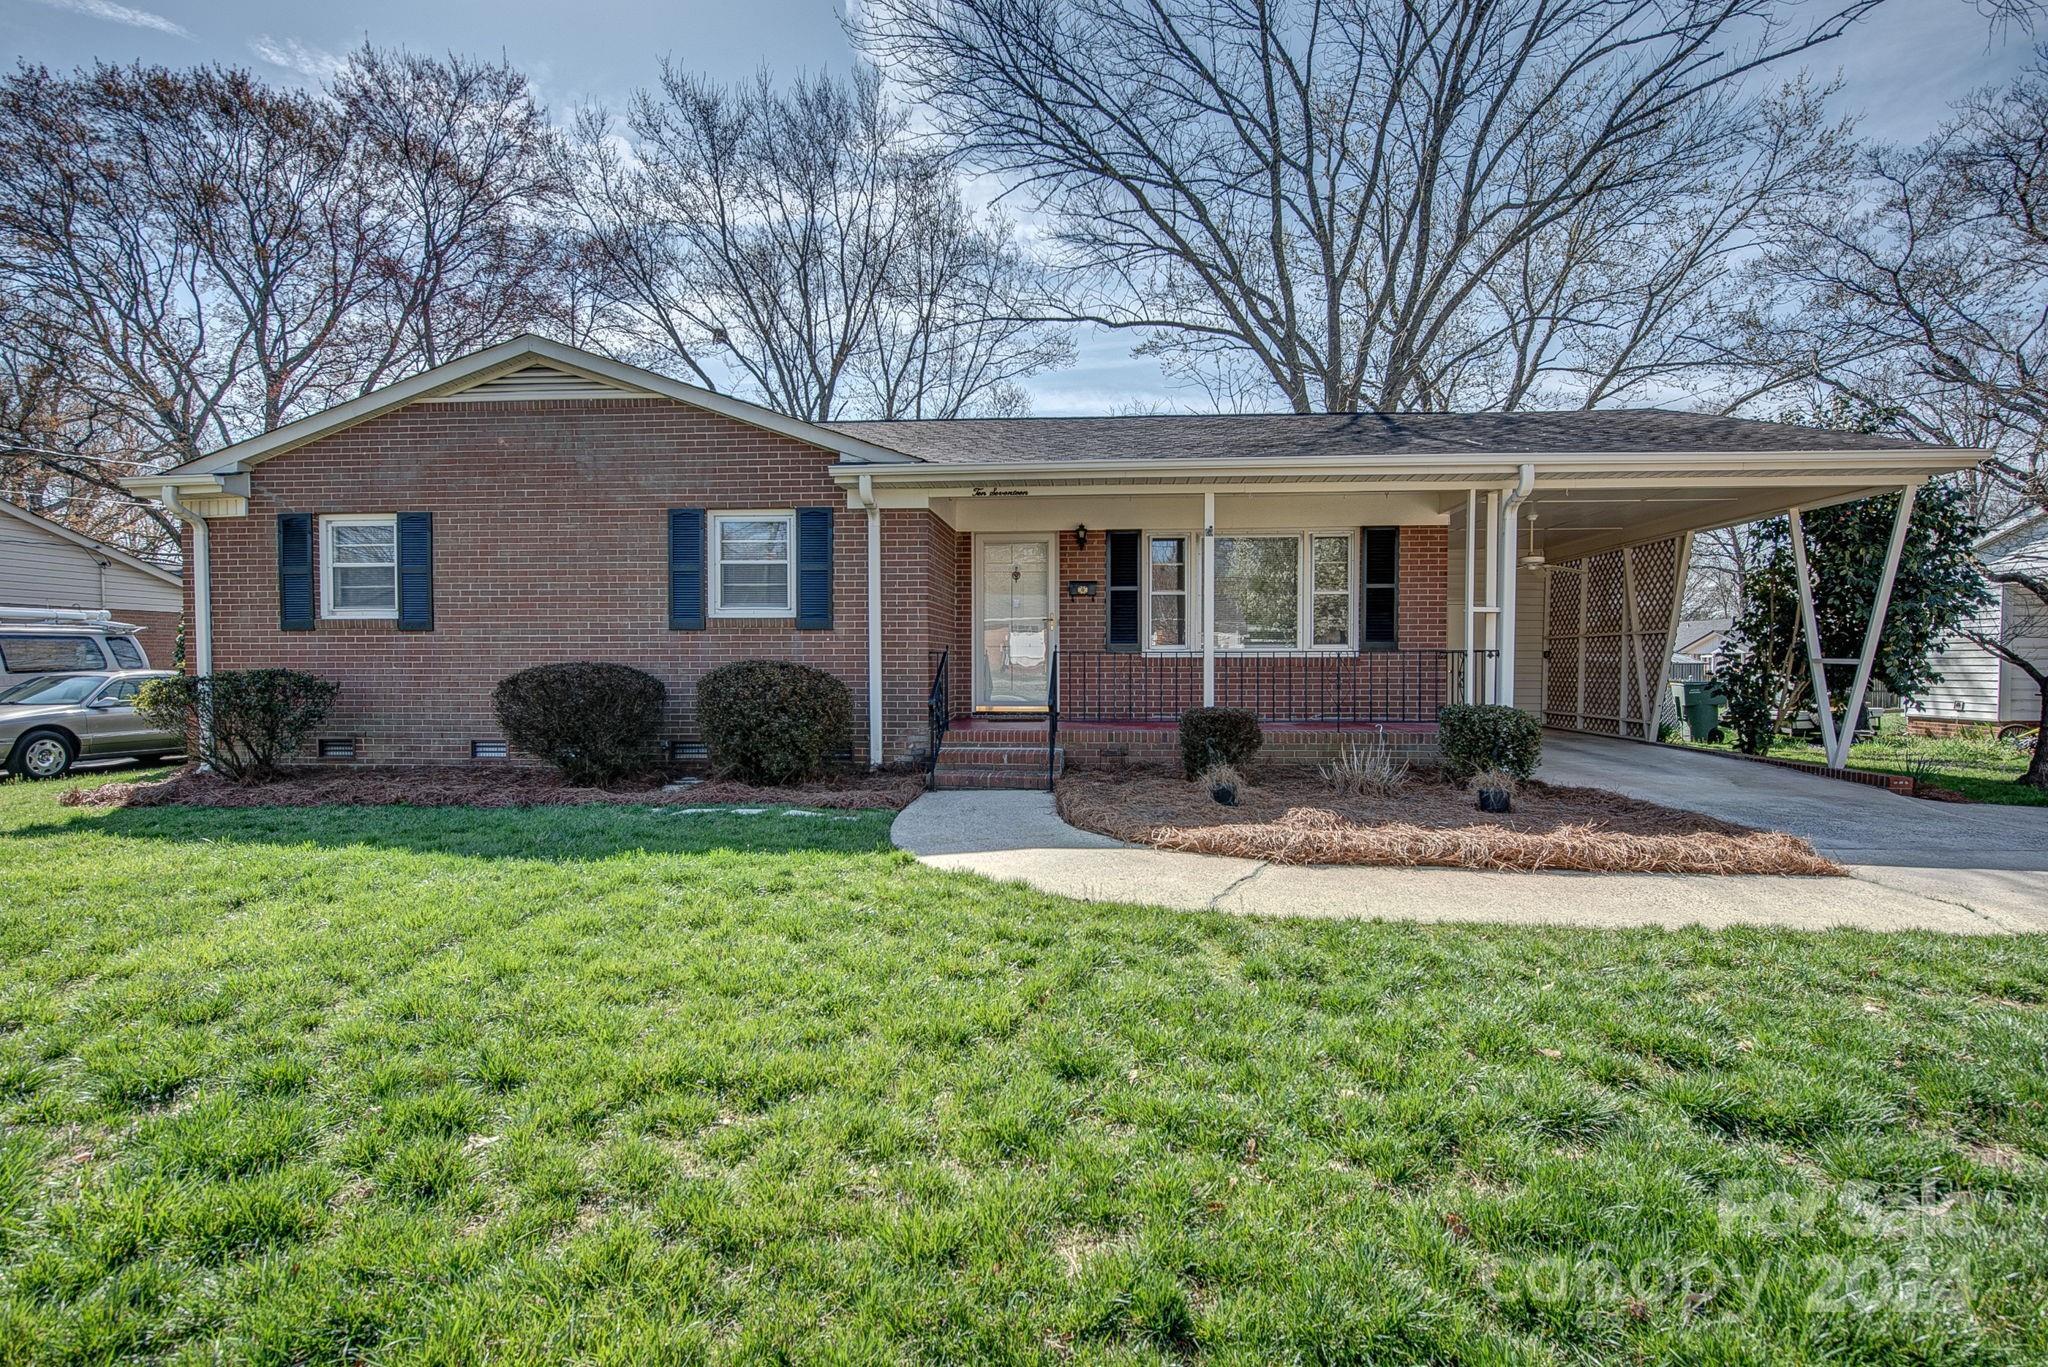 Photo one of 1017 Holly Dr Gastonia NC 28054 | MLS 4116717